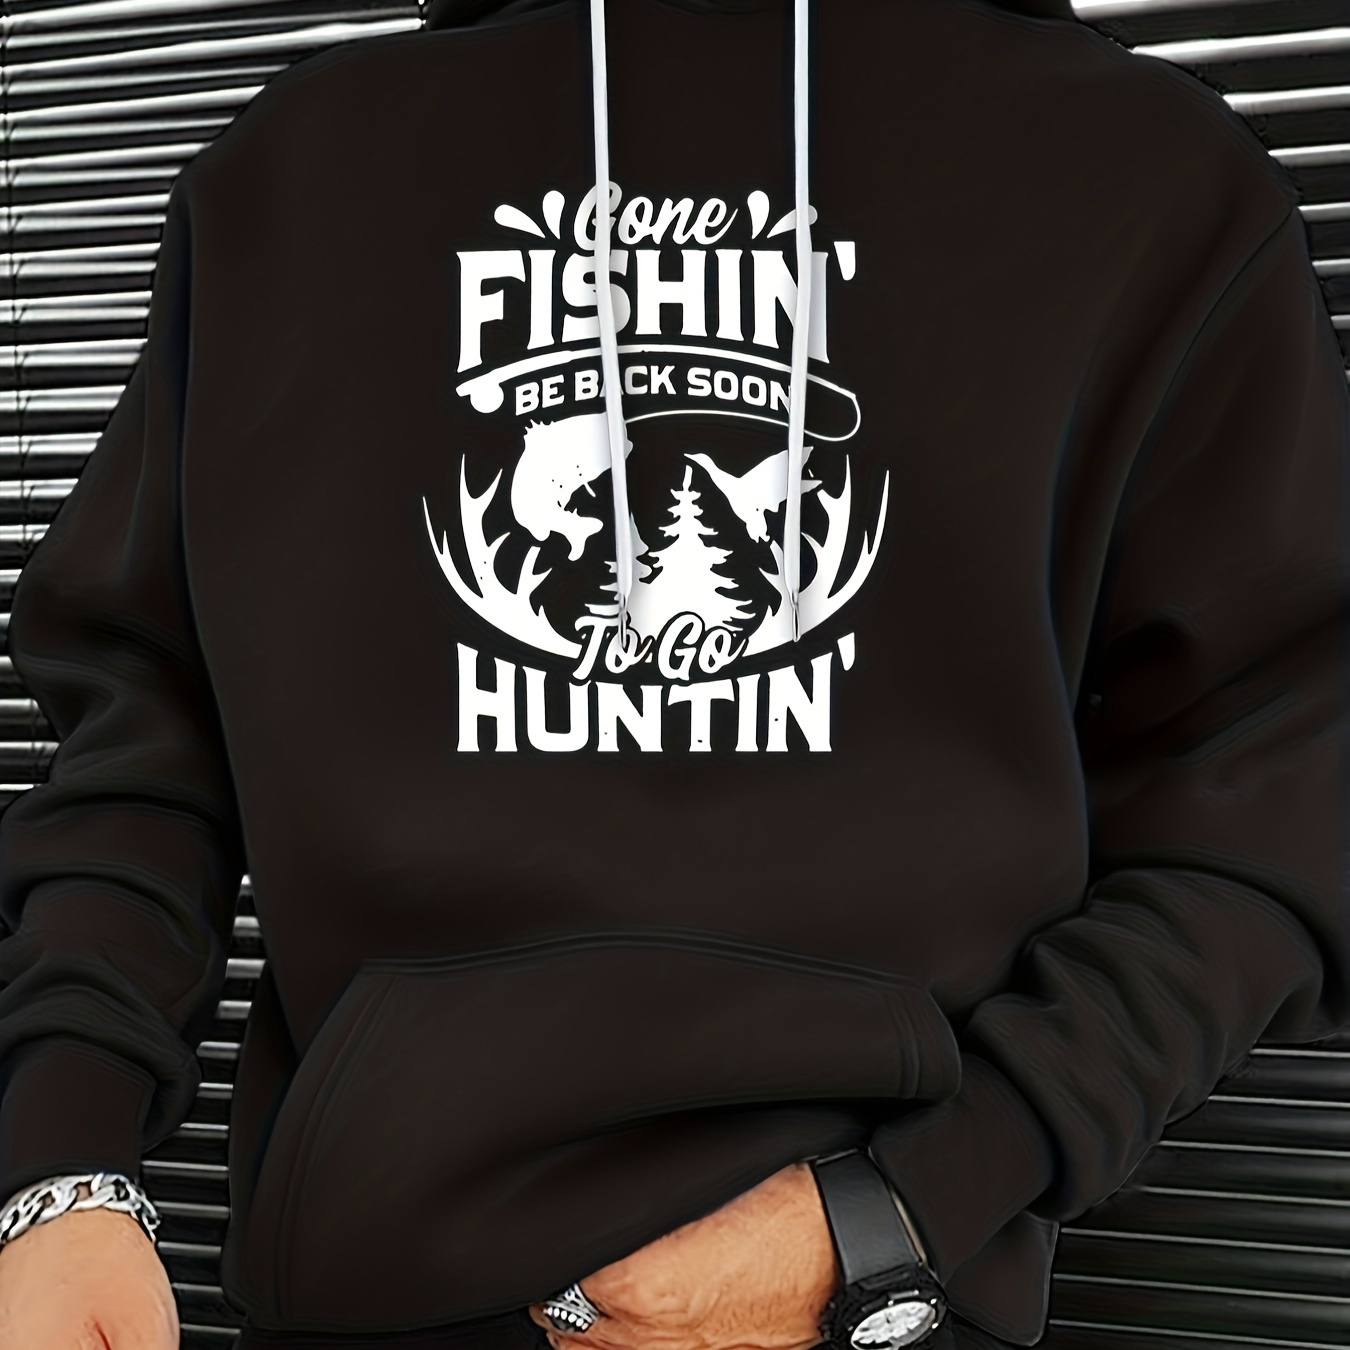 

Fishing & Hunting Letter Print, Hoodies For Men, Graphic Sweatshirt With Kangaroo Pocket, Comfy Trendy Hooded Pullover, Mens Clothing For Fall Winter